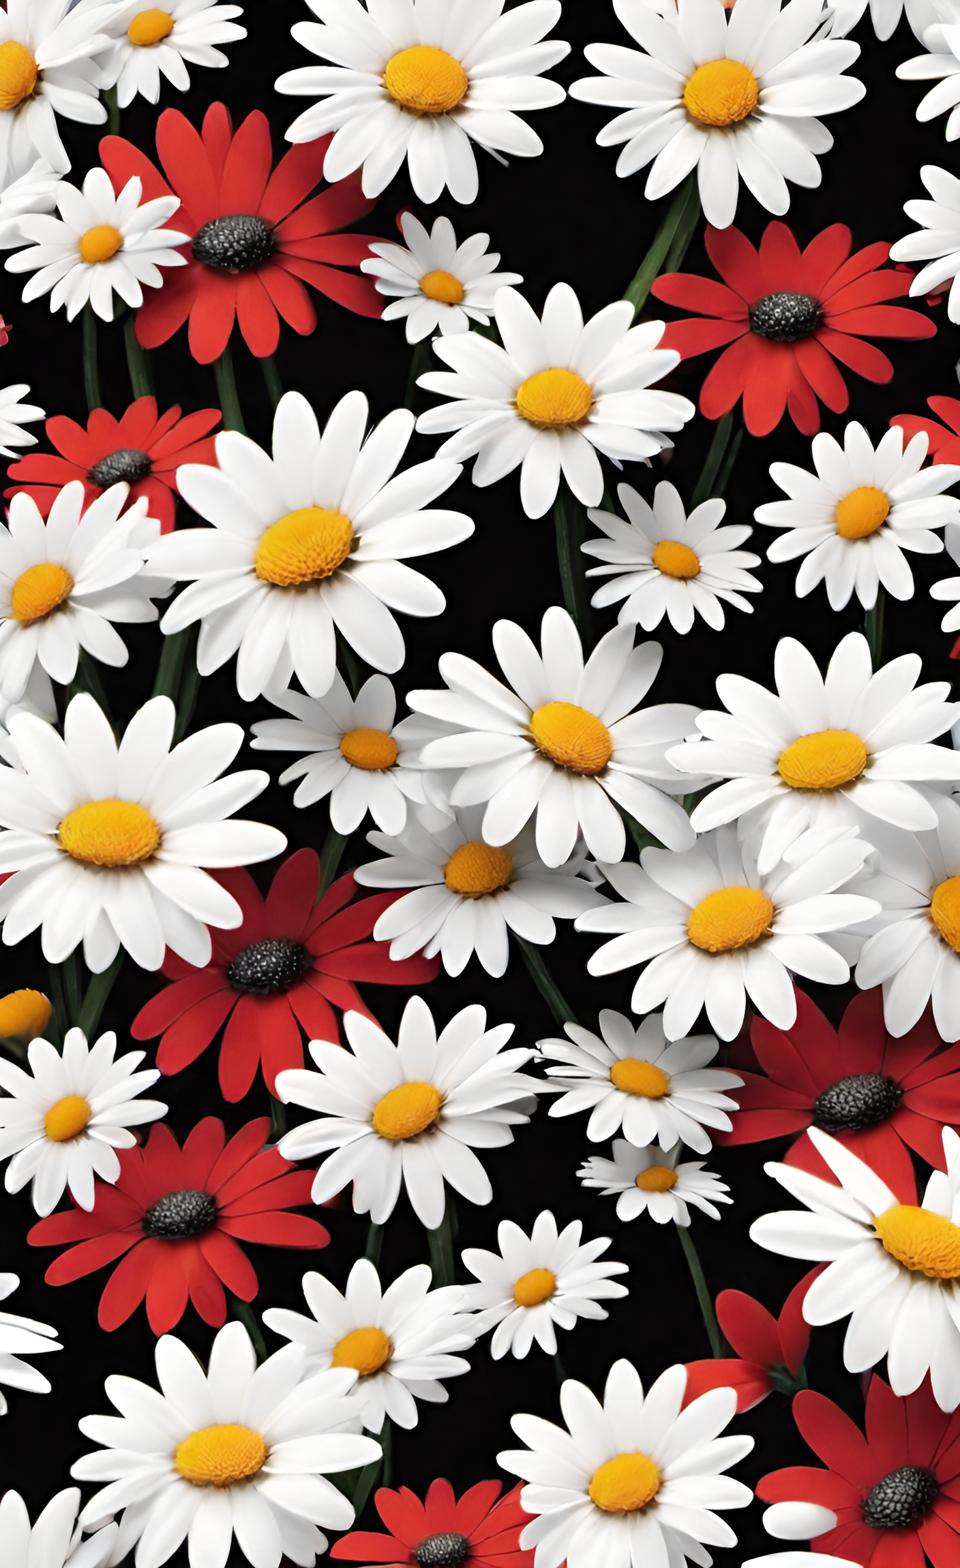 Small Daisies Red Black White Colorful Cute Background Wallpaper 4K For Free Download